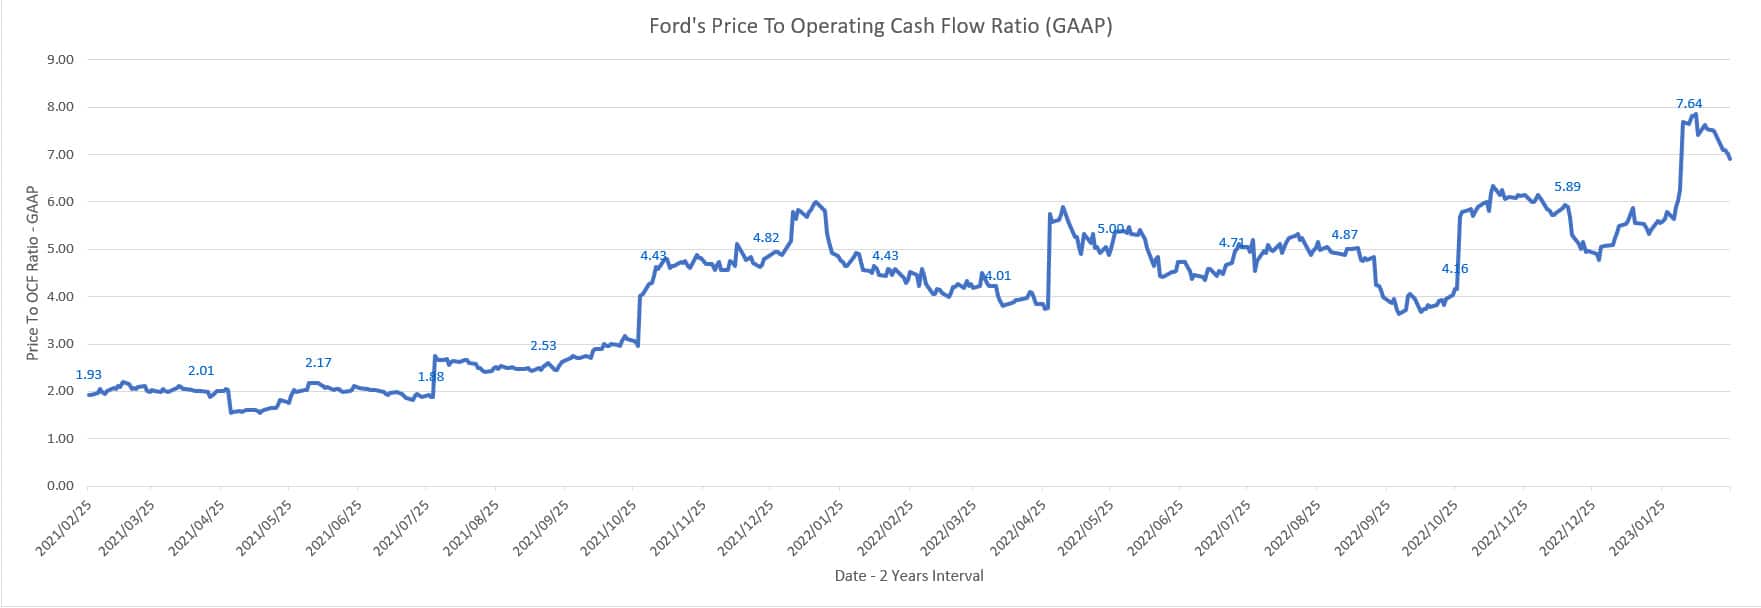 Ford's price to operating cash flow ratio